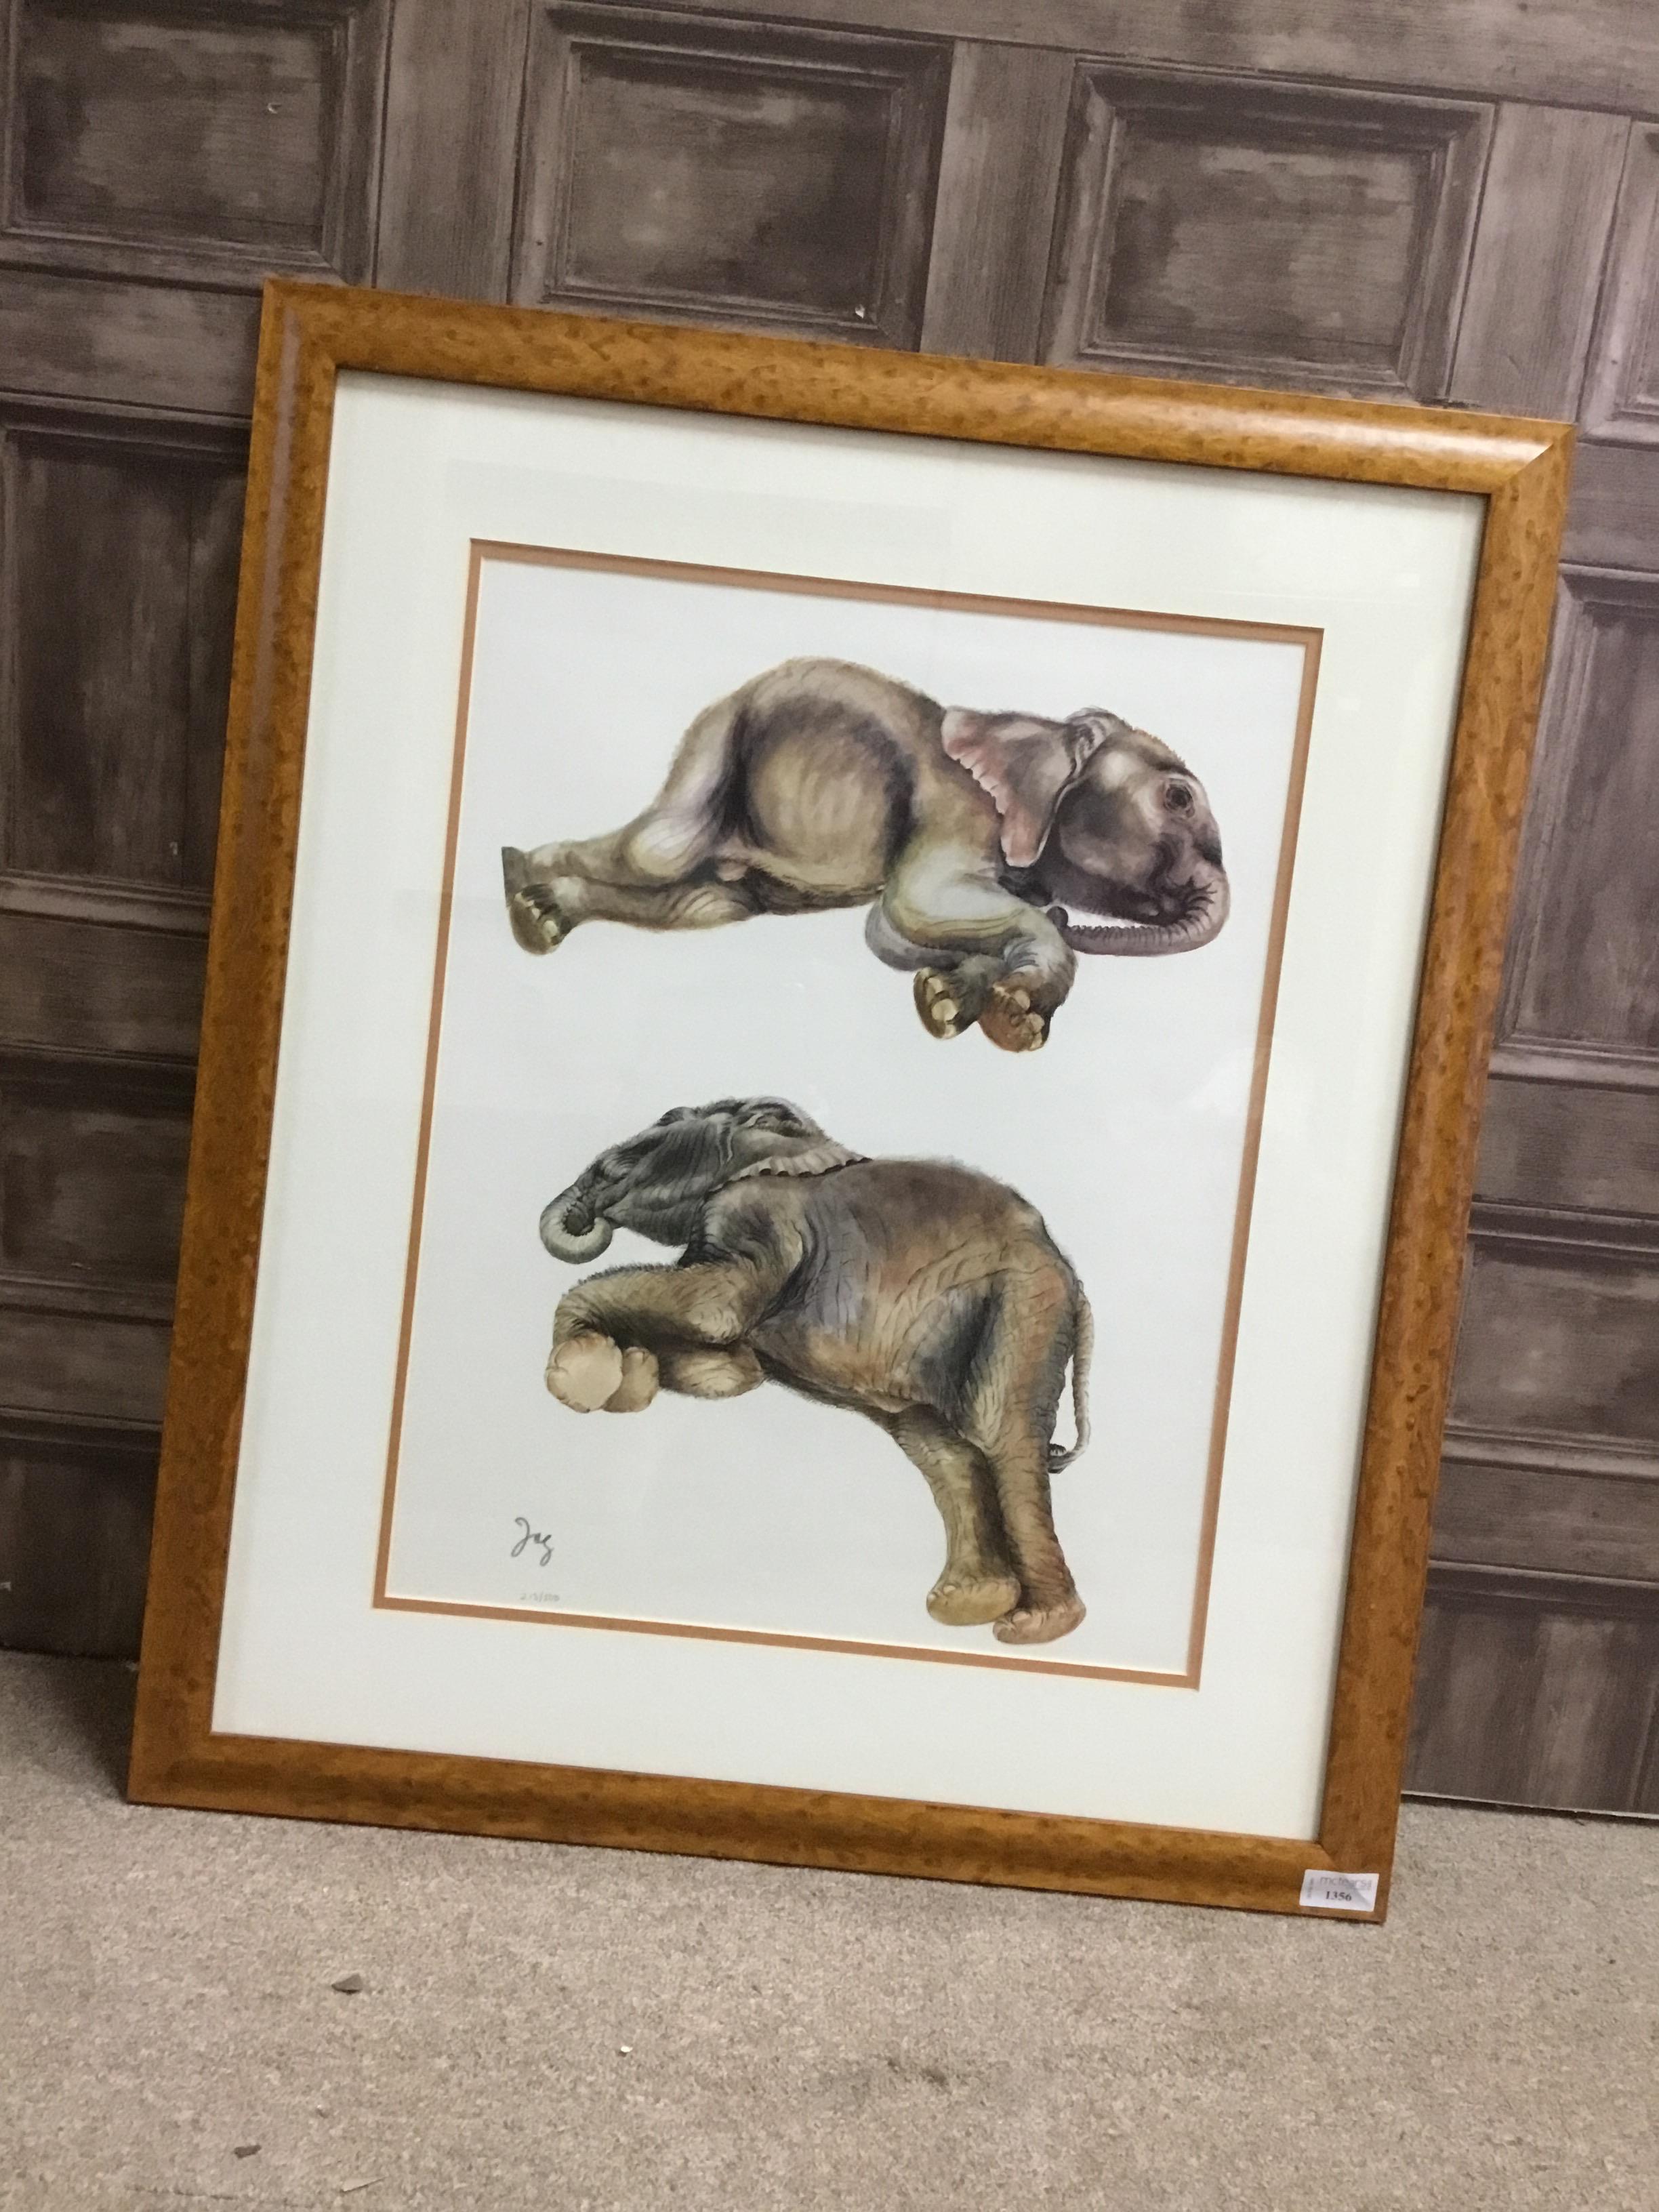 BABY ELEPHANTS, A LIMITED EDITION PRINT BY JOY ADAMSON - Image 2 of 2